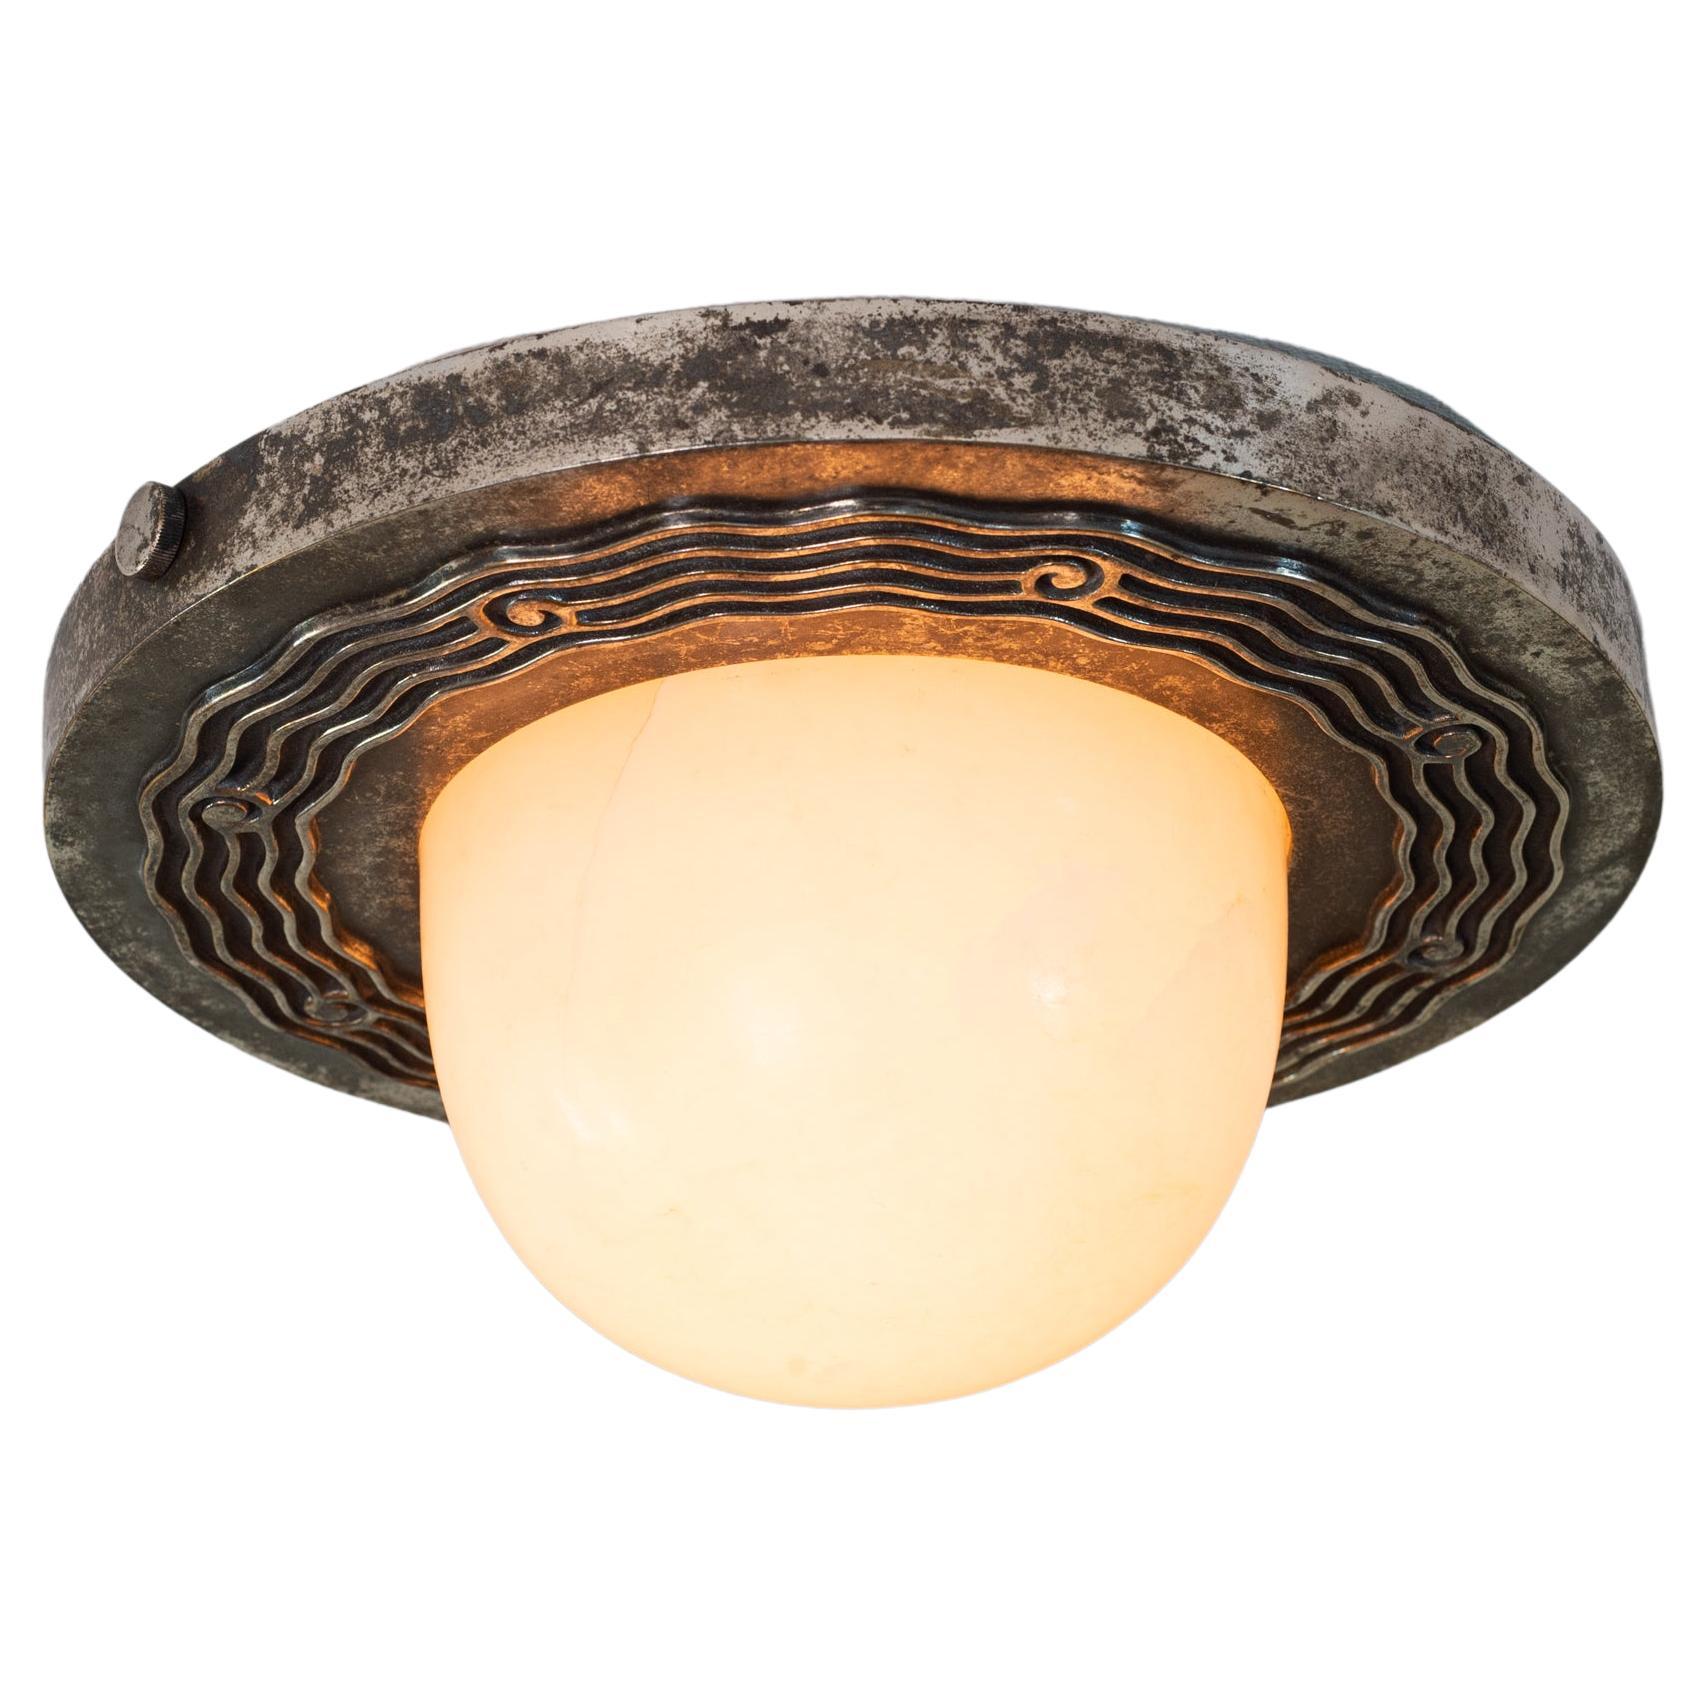 A stunning French Art Deco flush mount comprised of a silvered-bronze base that holds a carved alabaster light bowl. Some attribute this design to Emile-Jacques Ruhlmann, who collaborated with Philippe Genet and Lucien Michon.